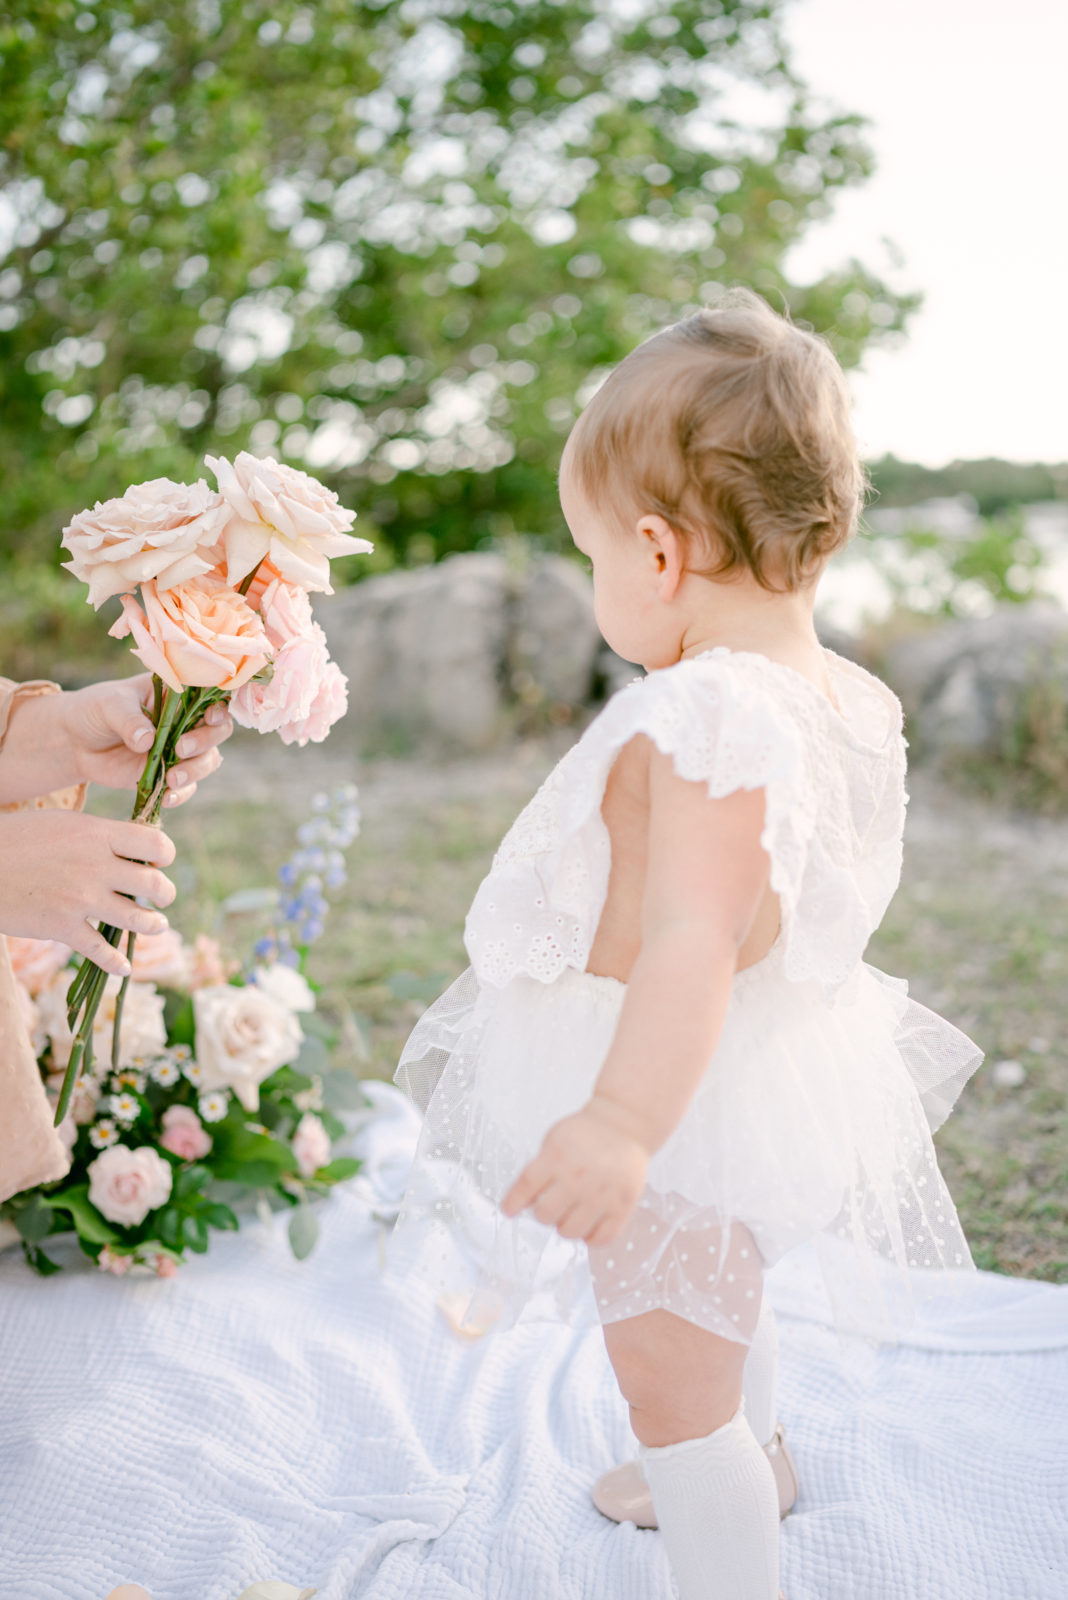 Baby photo shoot with flowers